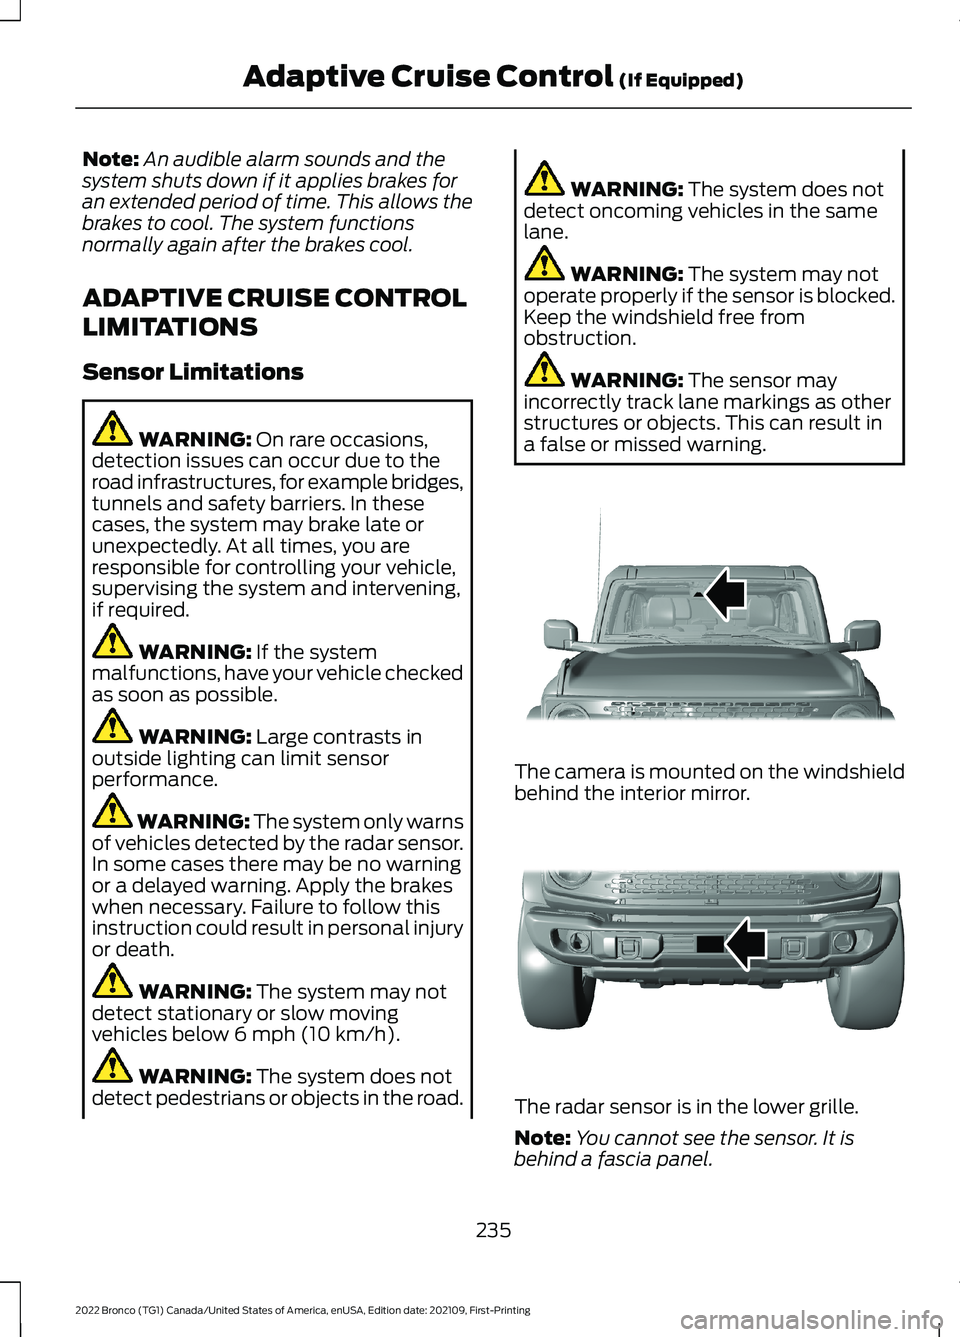 FORD BRONCO 2022 Service Manual Note:An audible alarm sounds and thesystem shuts down if it applies brakes foran extended period of time. This allows thebrakes to cool. The system functionsnormally again after the brakes cool.
ADAPT